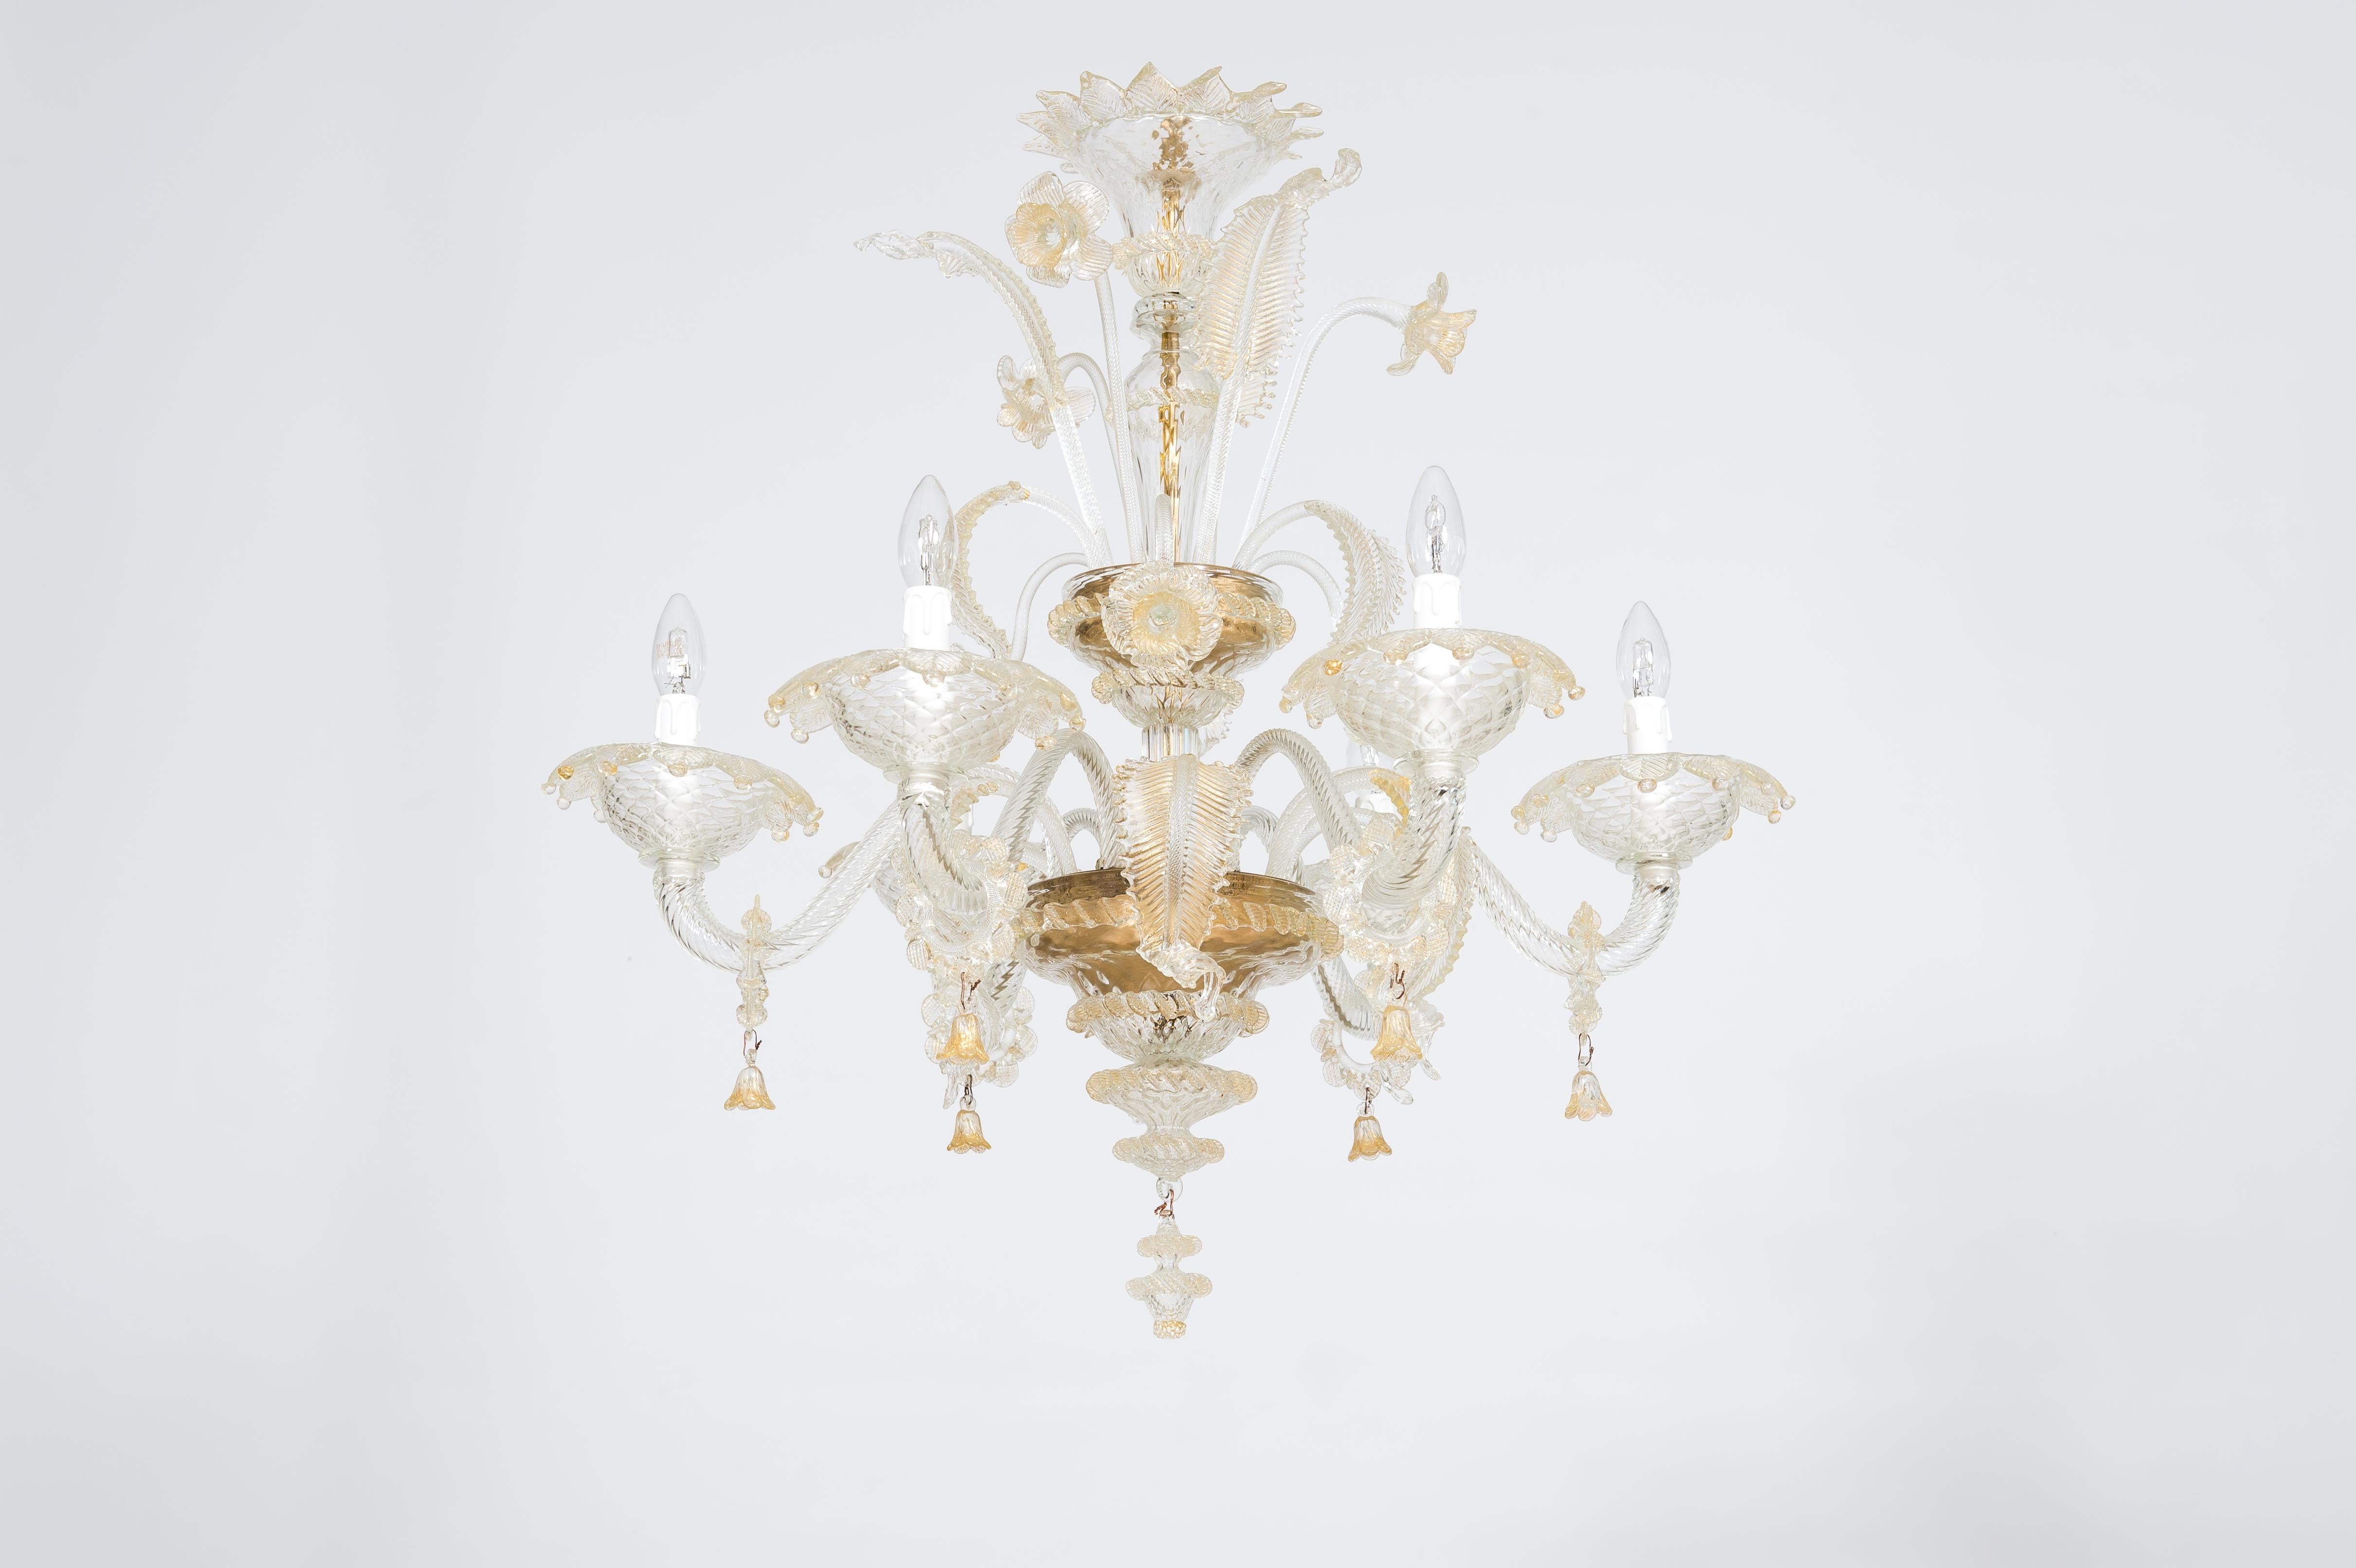 Modern Floral Murano Glass Chandelier with “Riga Dritta” Decorations, 20th Century